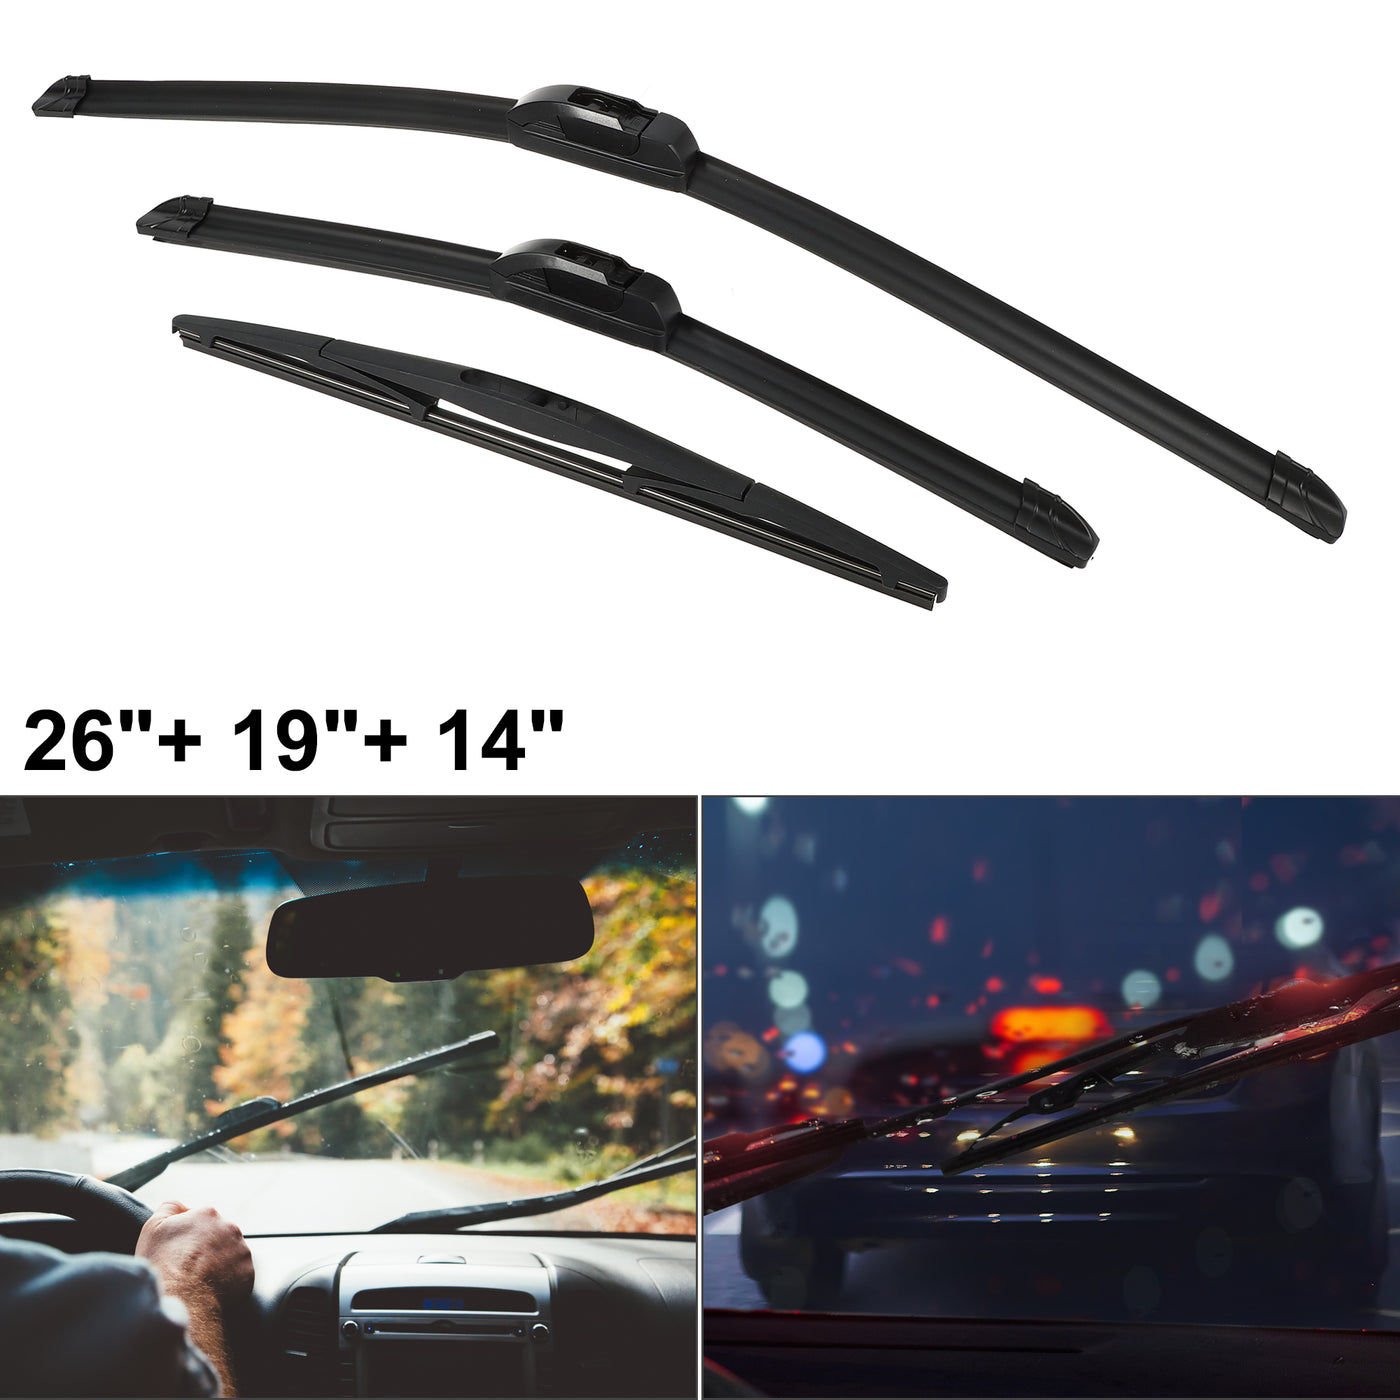 ACROPIX Front Rear Windshield Wiper Blade Set Car Wiper Blade Fit for Subaru Outback Legacy 2010-2014 - Pack of 3 Black